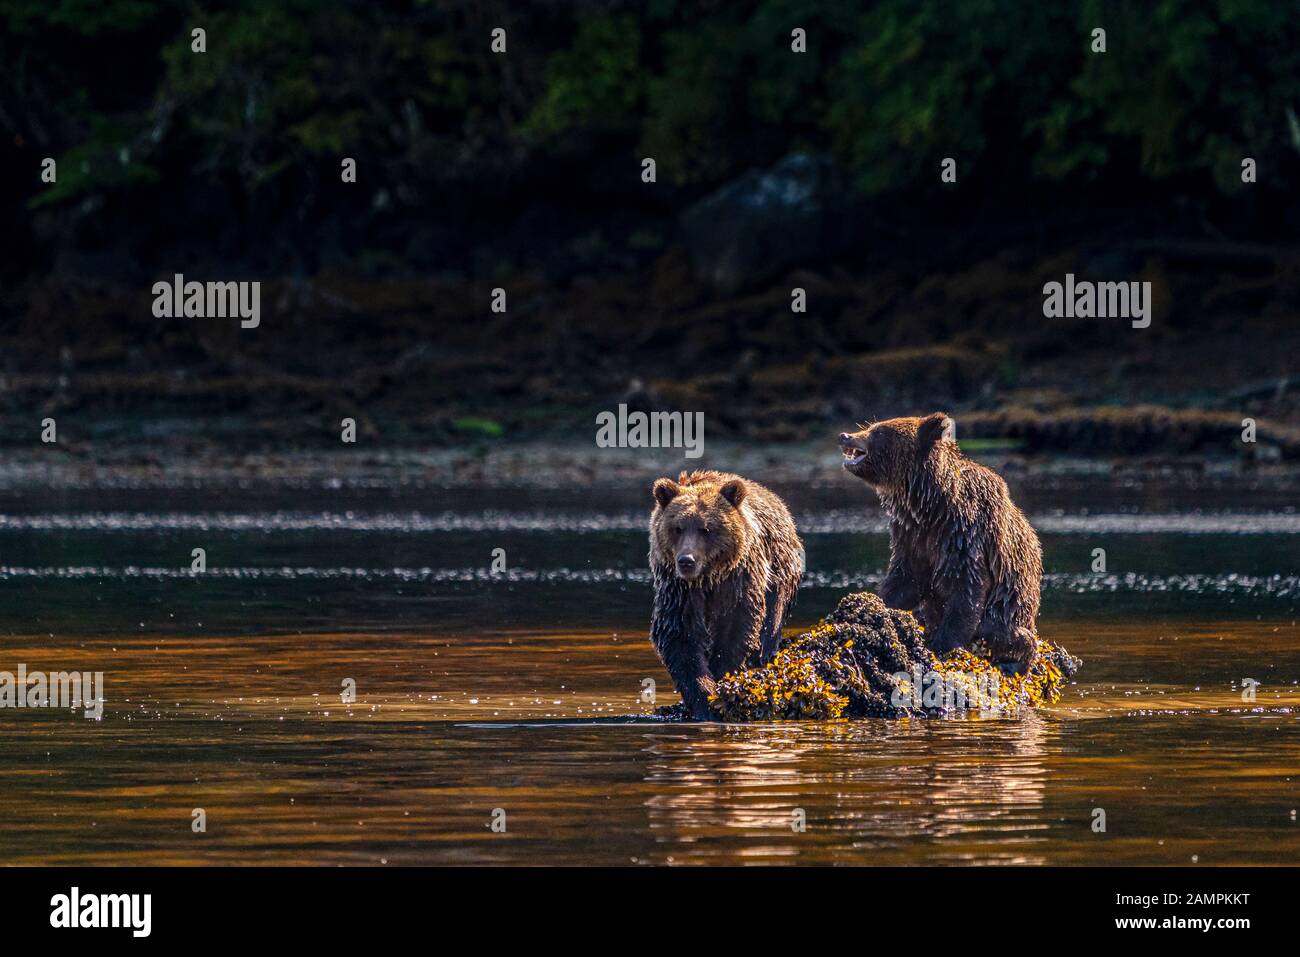 Two grizzly bear cubs feasting on a rock in Hoeya Sound, Knight Inlet, First Nations Territory, British Columbia, Canada. Stock Photo